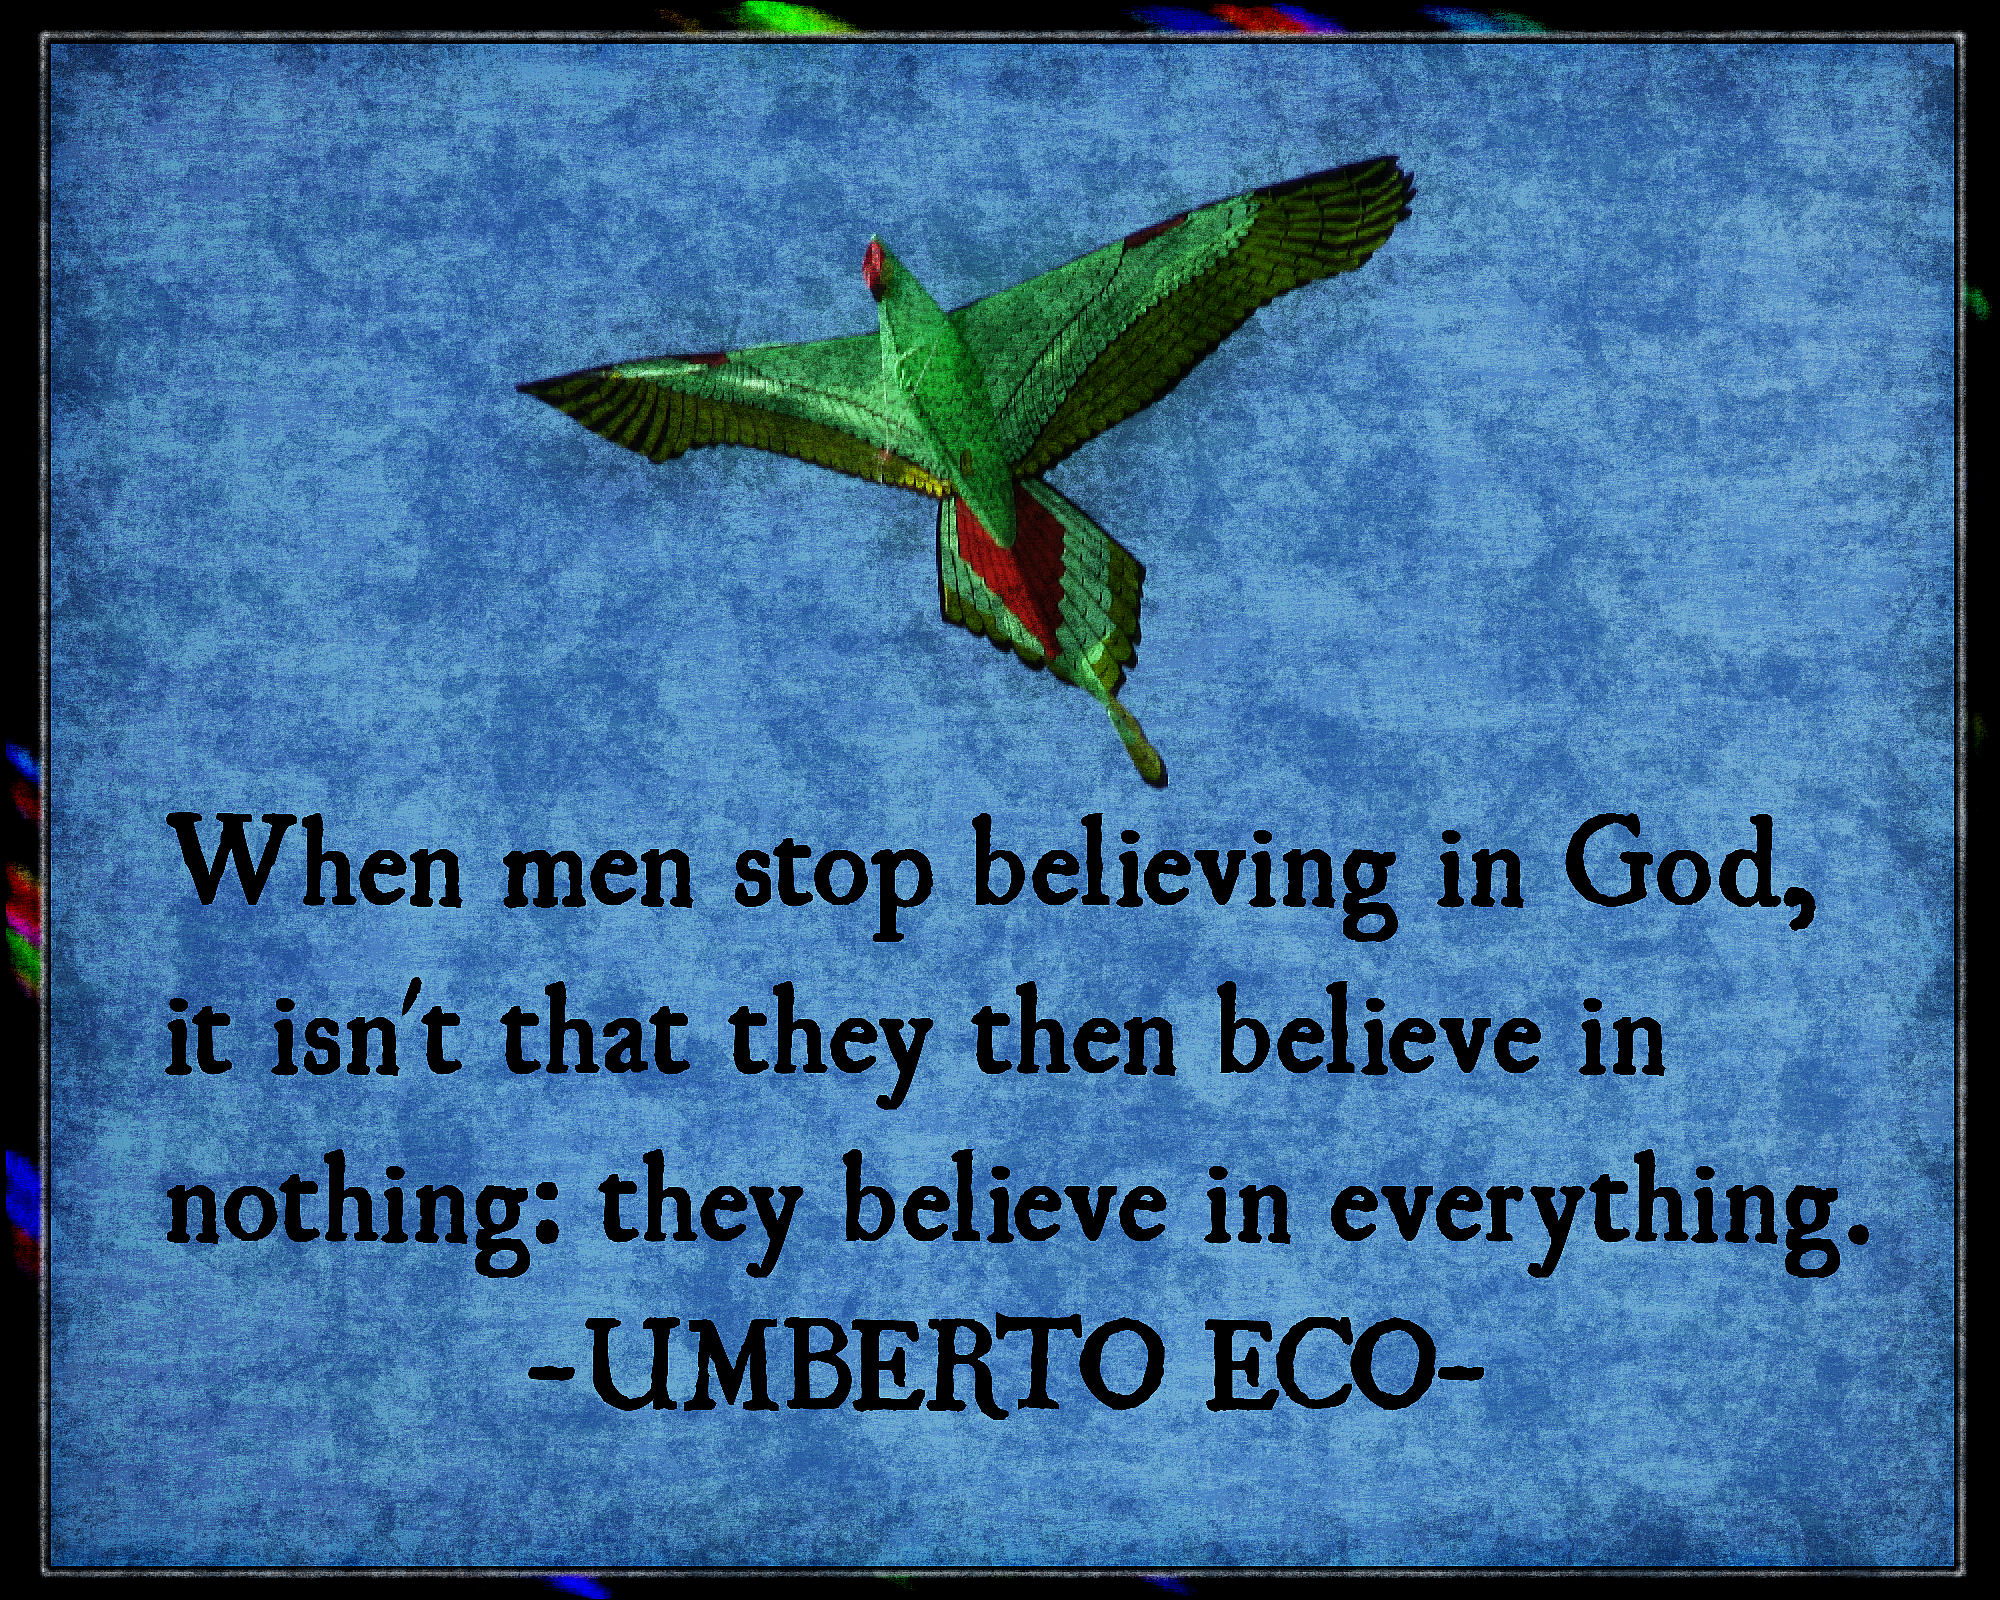 Quote by Umberto Eco,When men stop believing in God, it isn't that they then believe in nothing: they believe in everything.